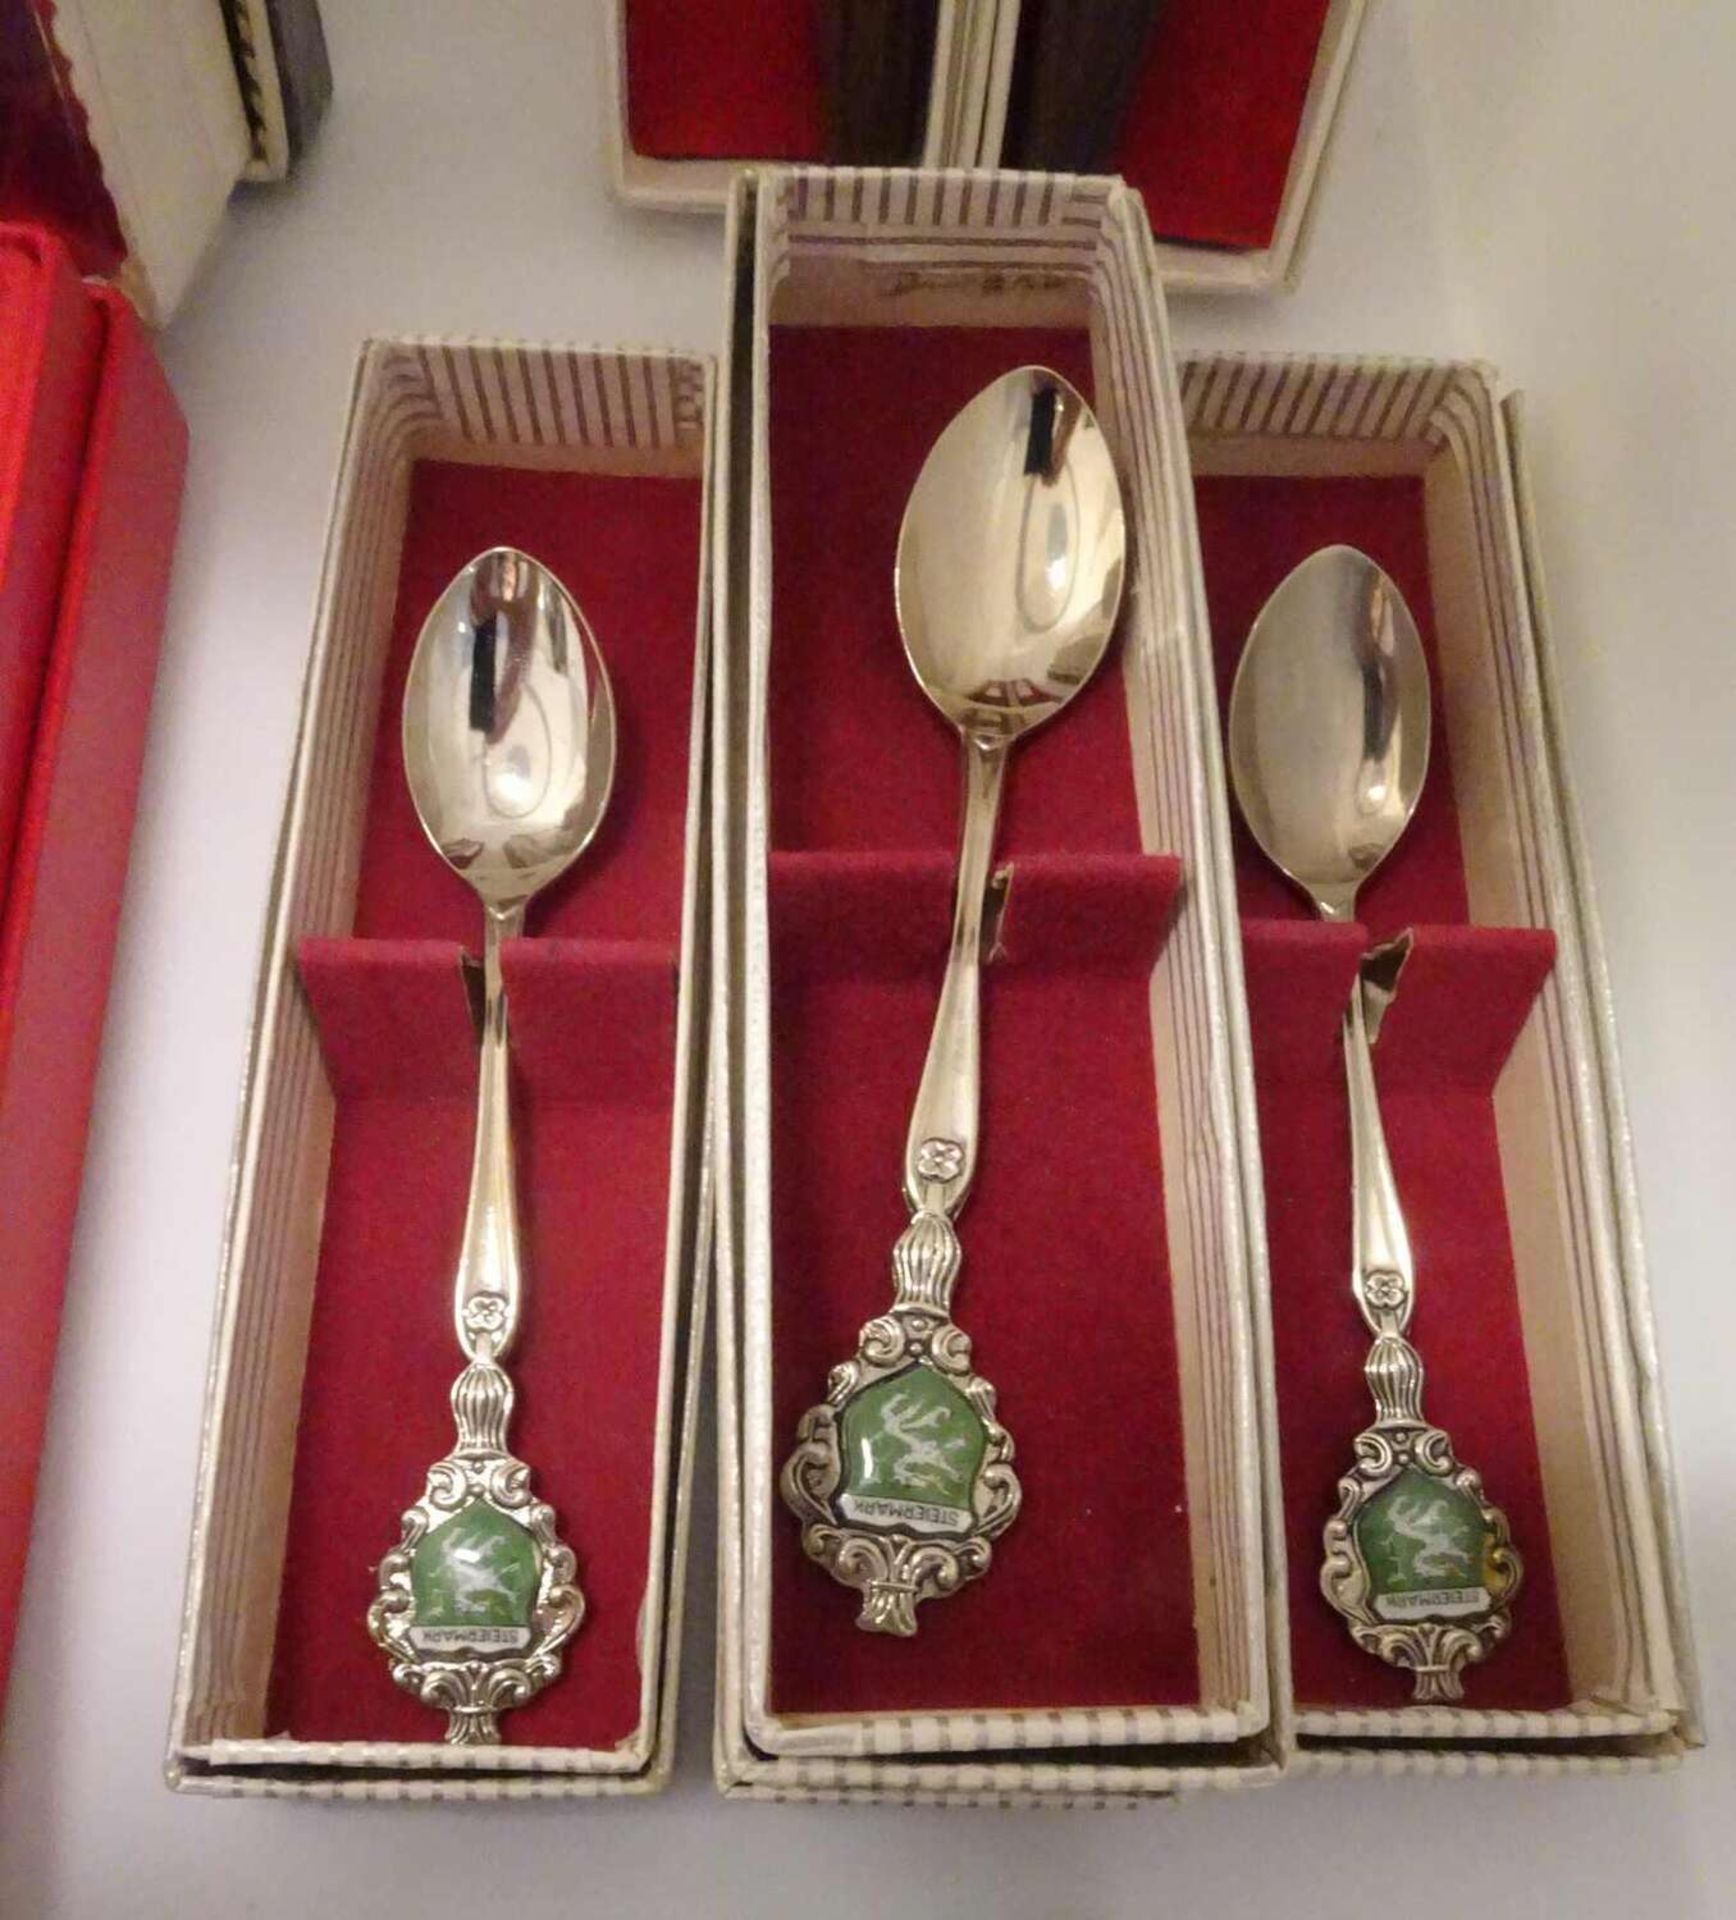 Lot versilberte Besteckteile, dabei auch Andenkenlöffel Lot of silver-plated pieces of cutlery, - Image 3 of 3